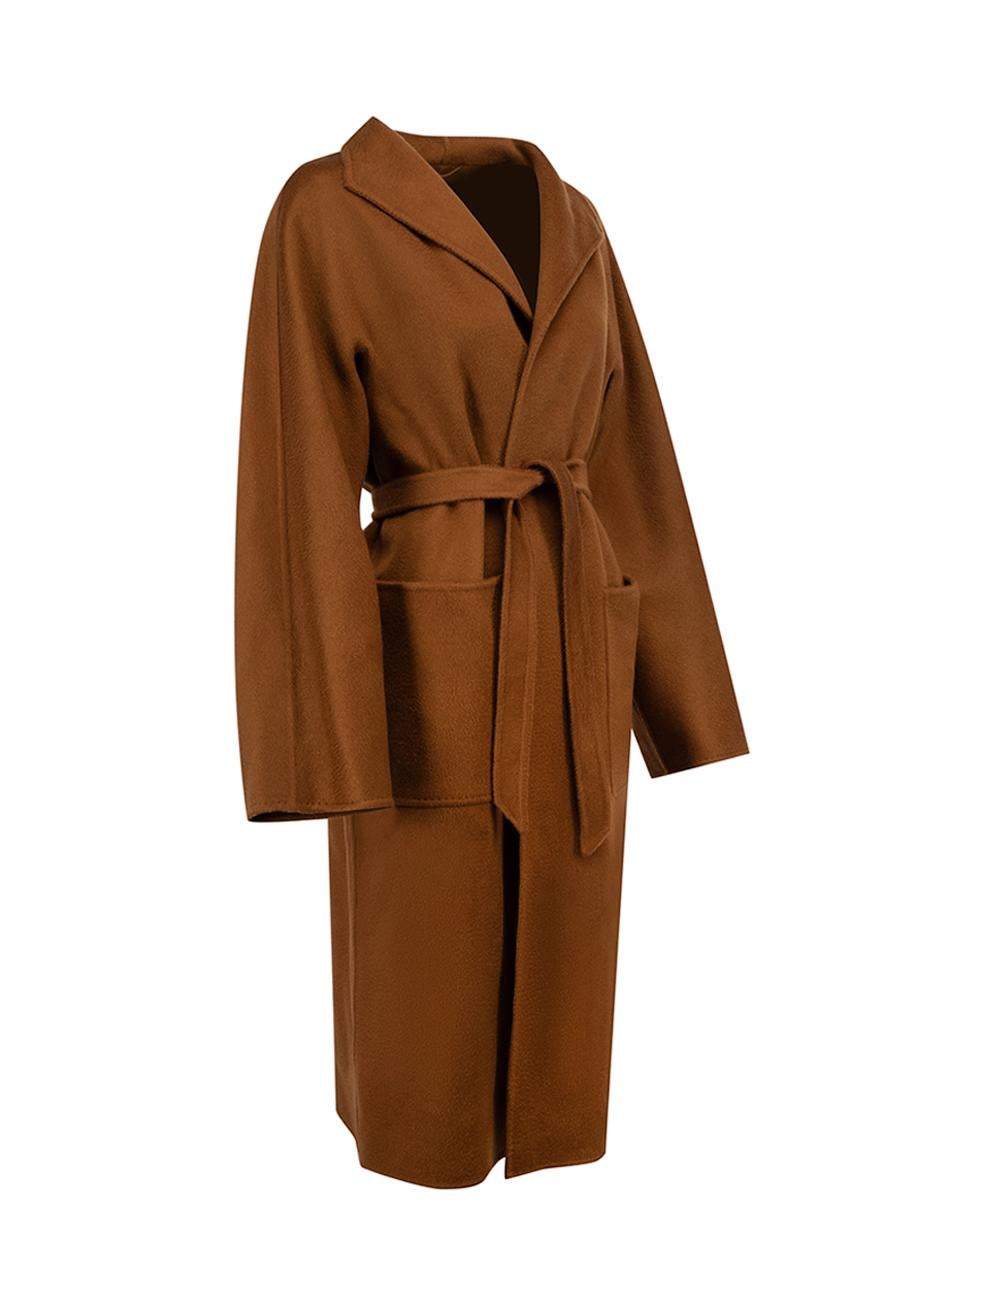 CONDITION is Very good. Hardly any visible wear to coat is evident on this used Max Mara designer resale item.



Details


Brown

Cashmere

Mid length coat

Open front

Belted

2x Front patch pockets





Made in Italy 



Composition

100%